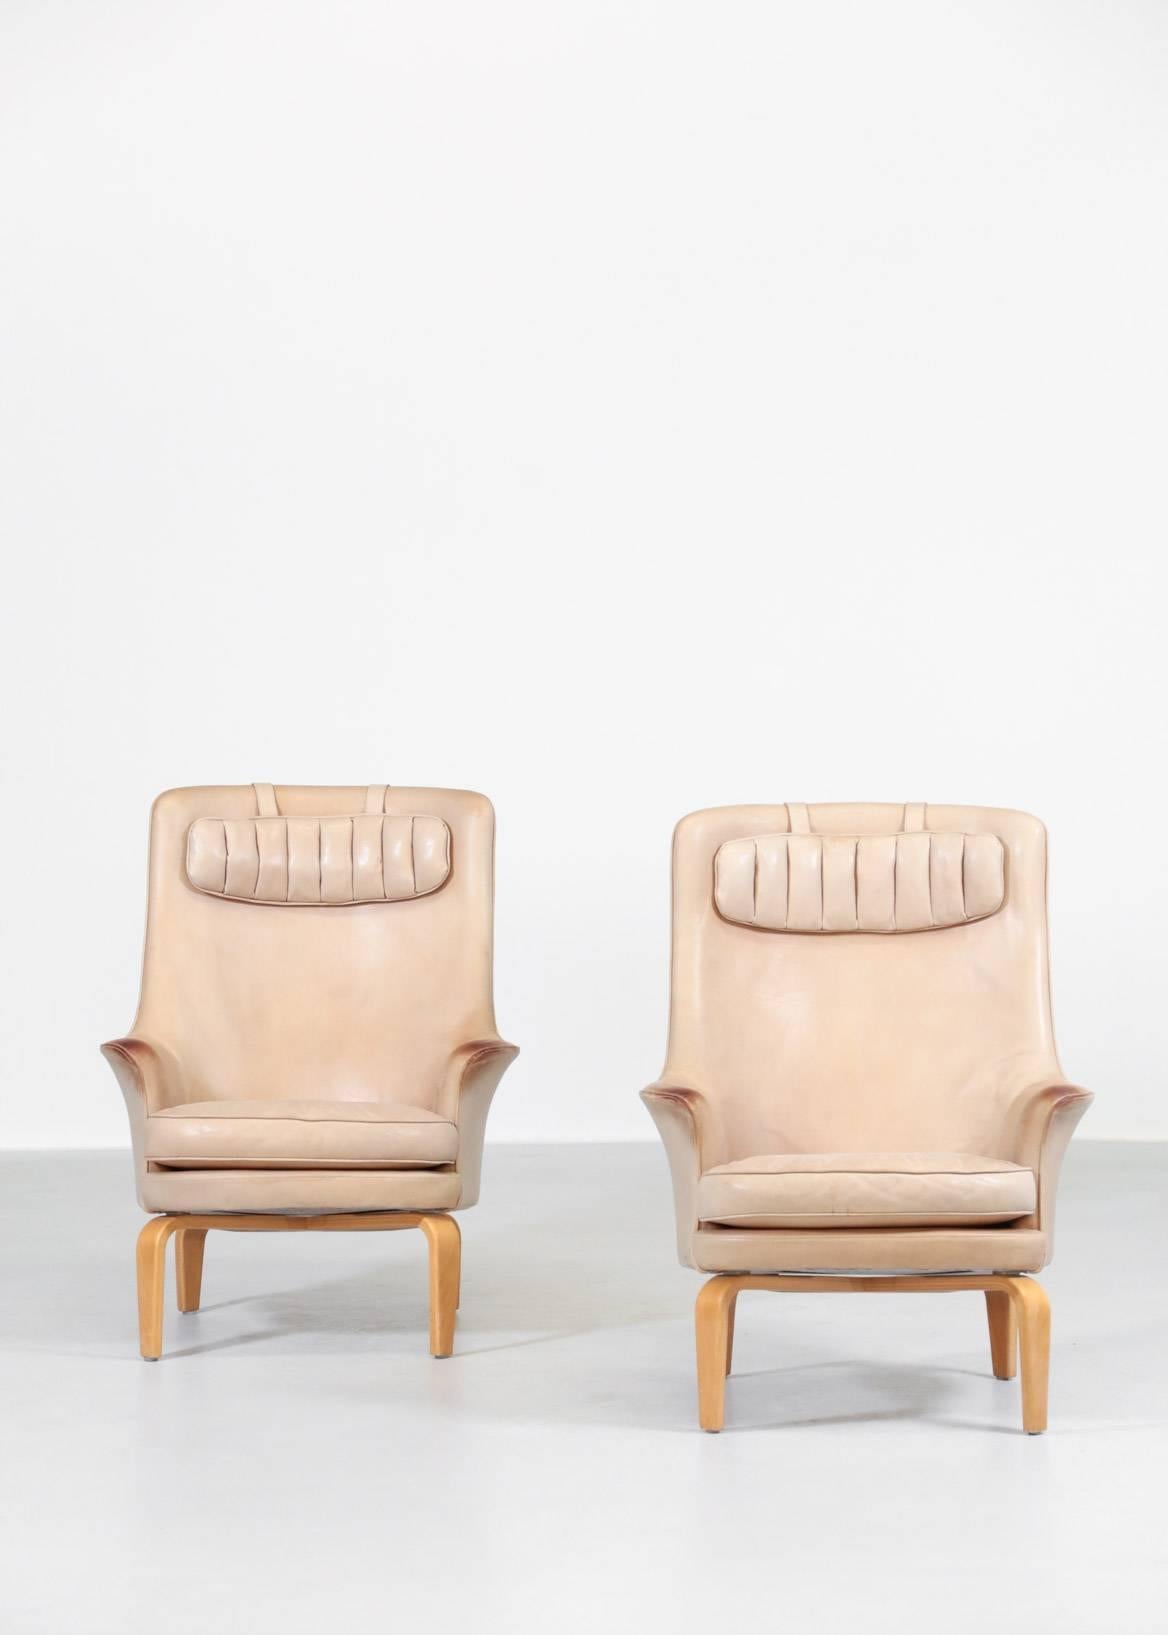 Rare armchairs designed by Arne Norell.
Seat in beige leather with beautiful patina.
Stamp on the seat.